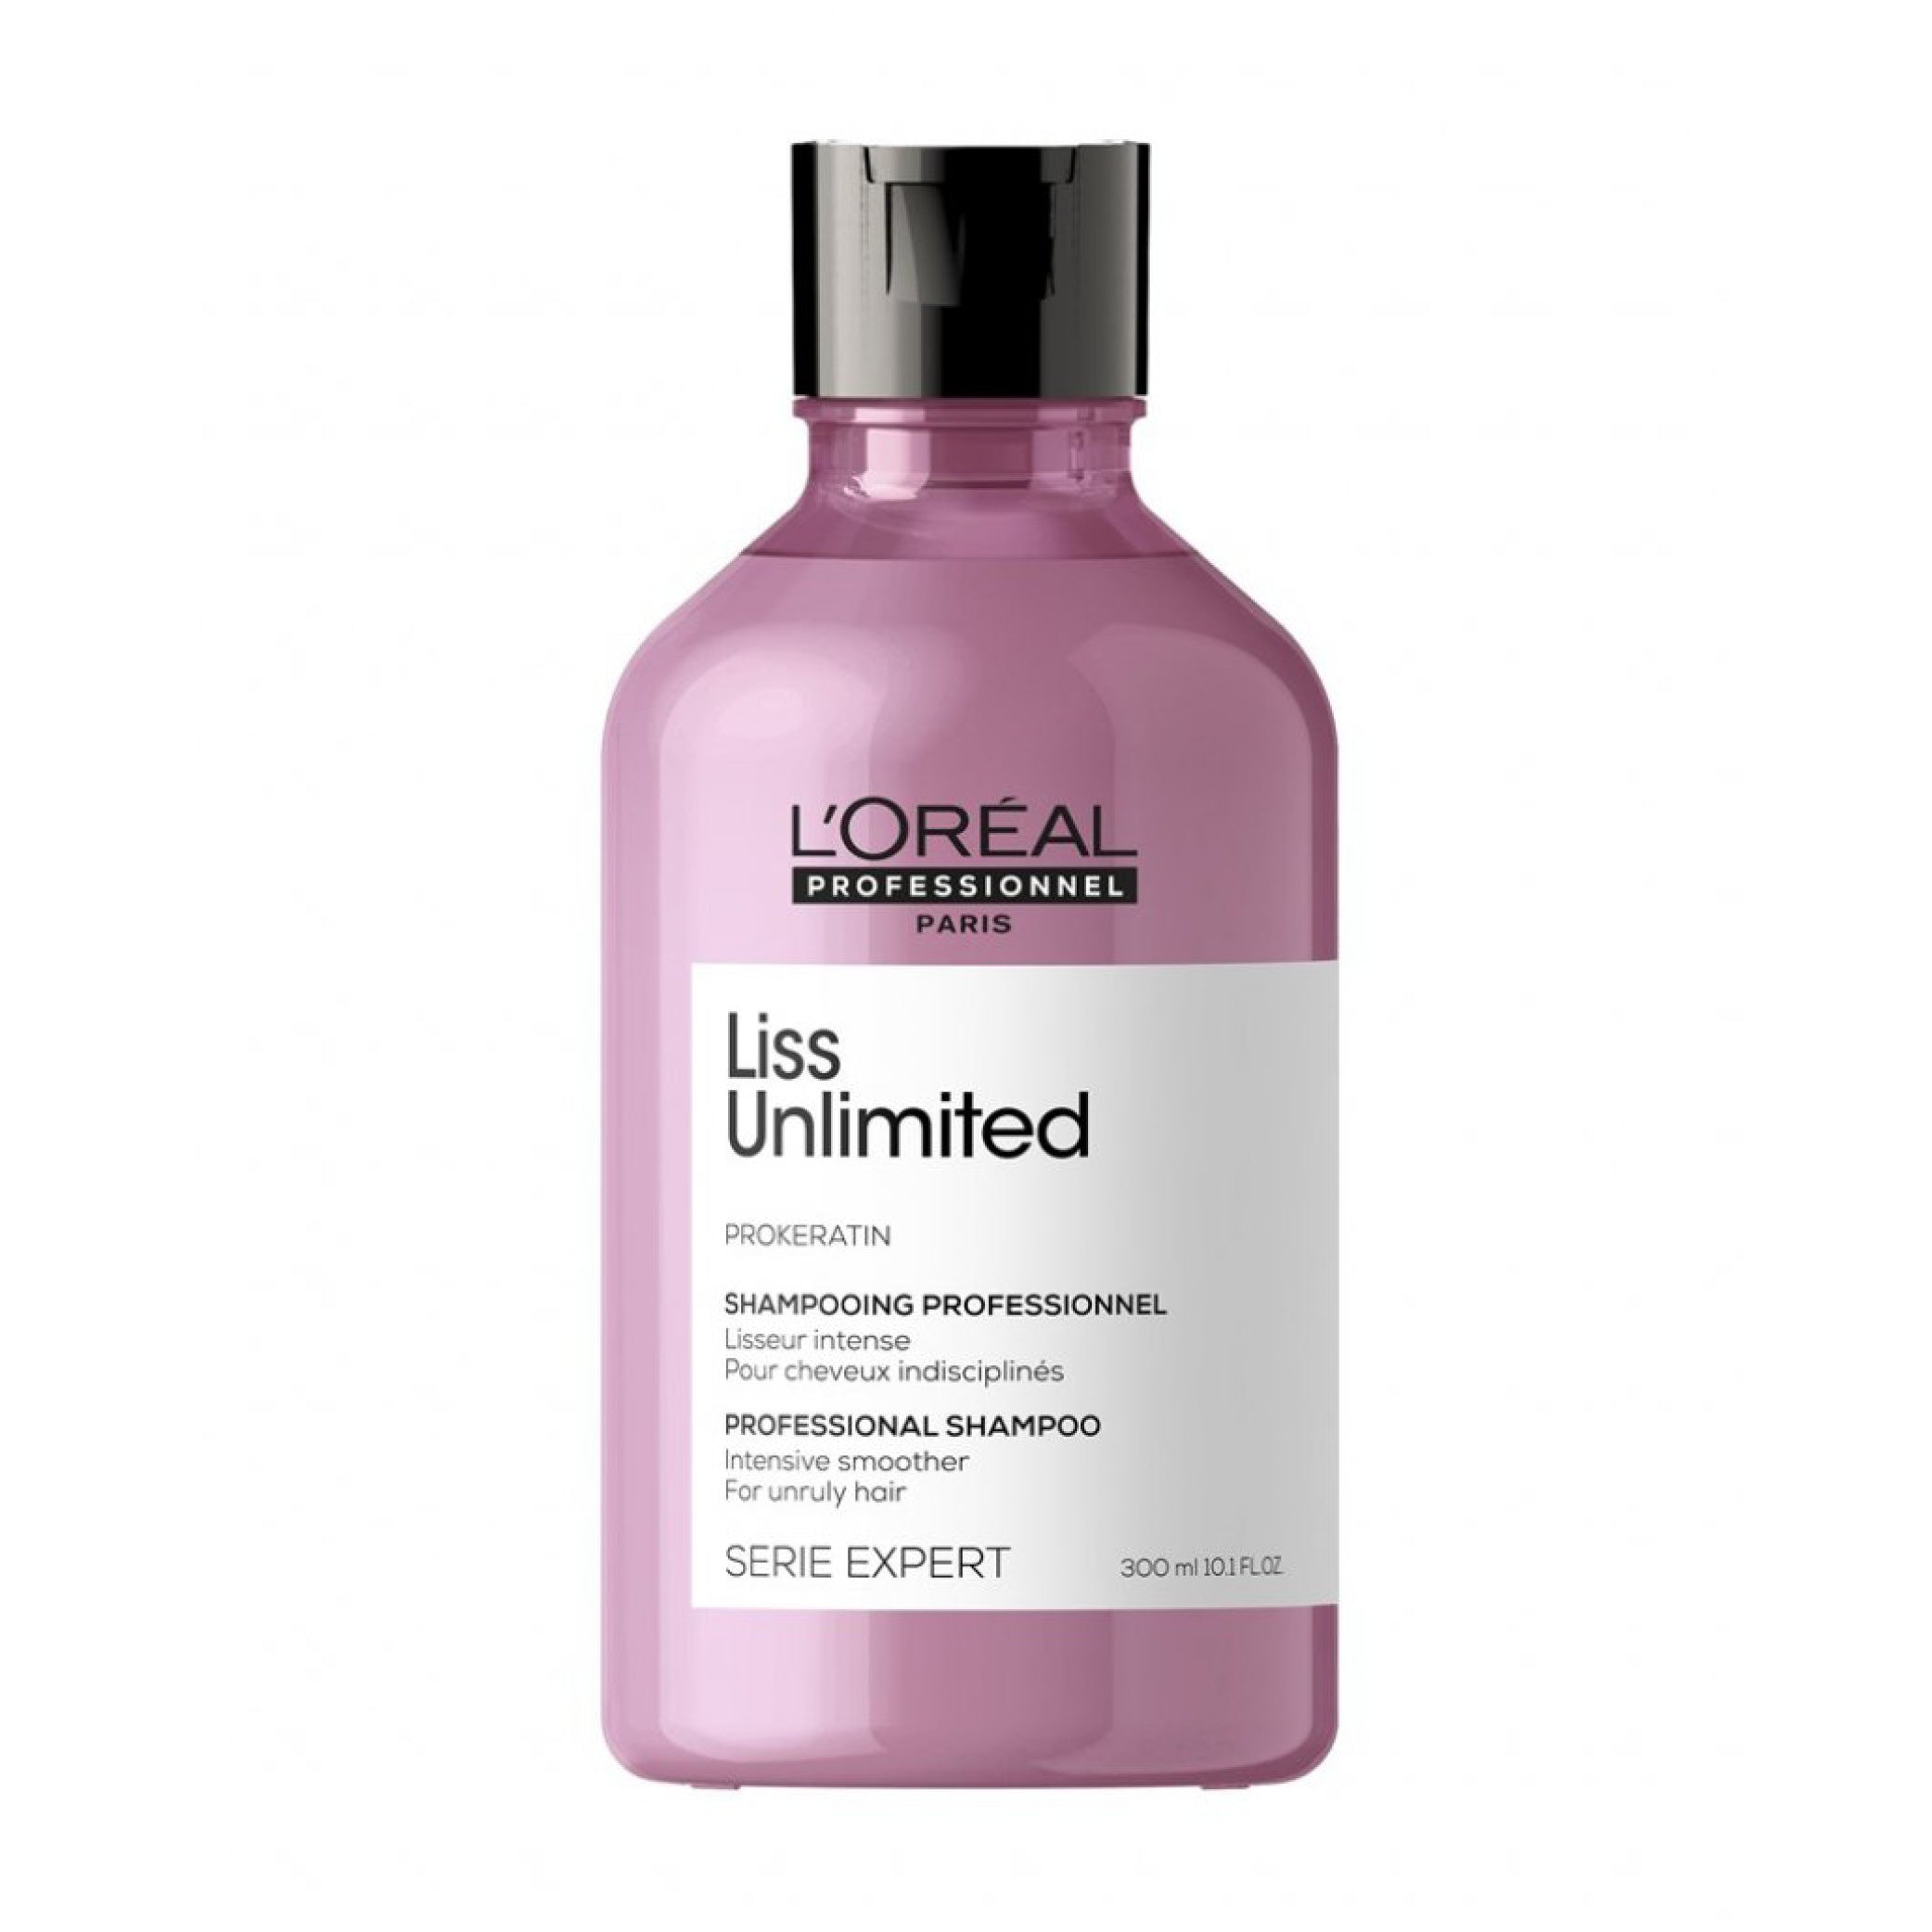 Liss Unlimited Shampoing